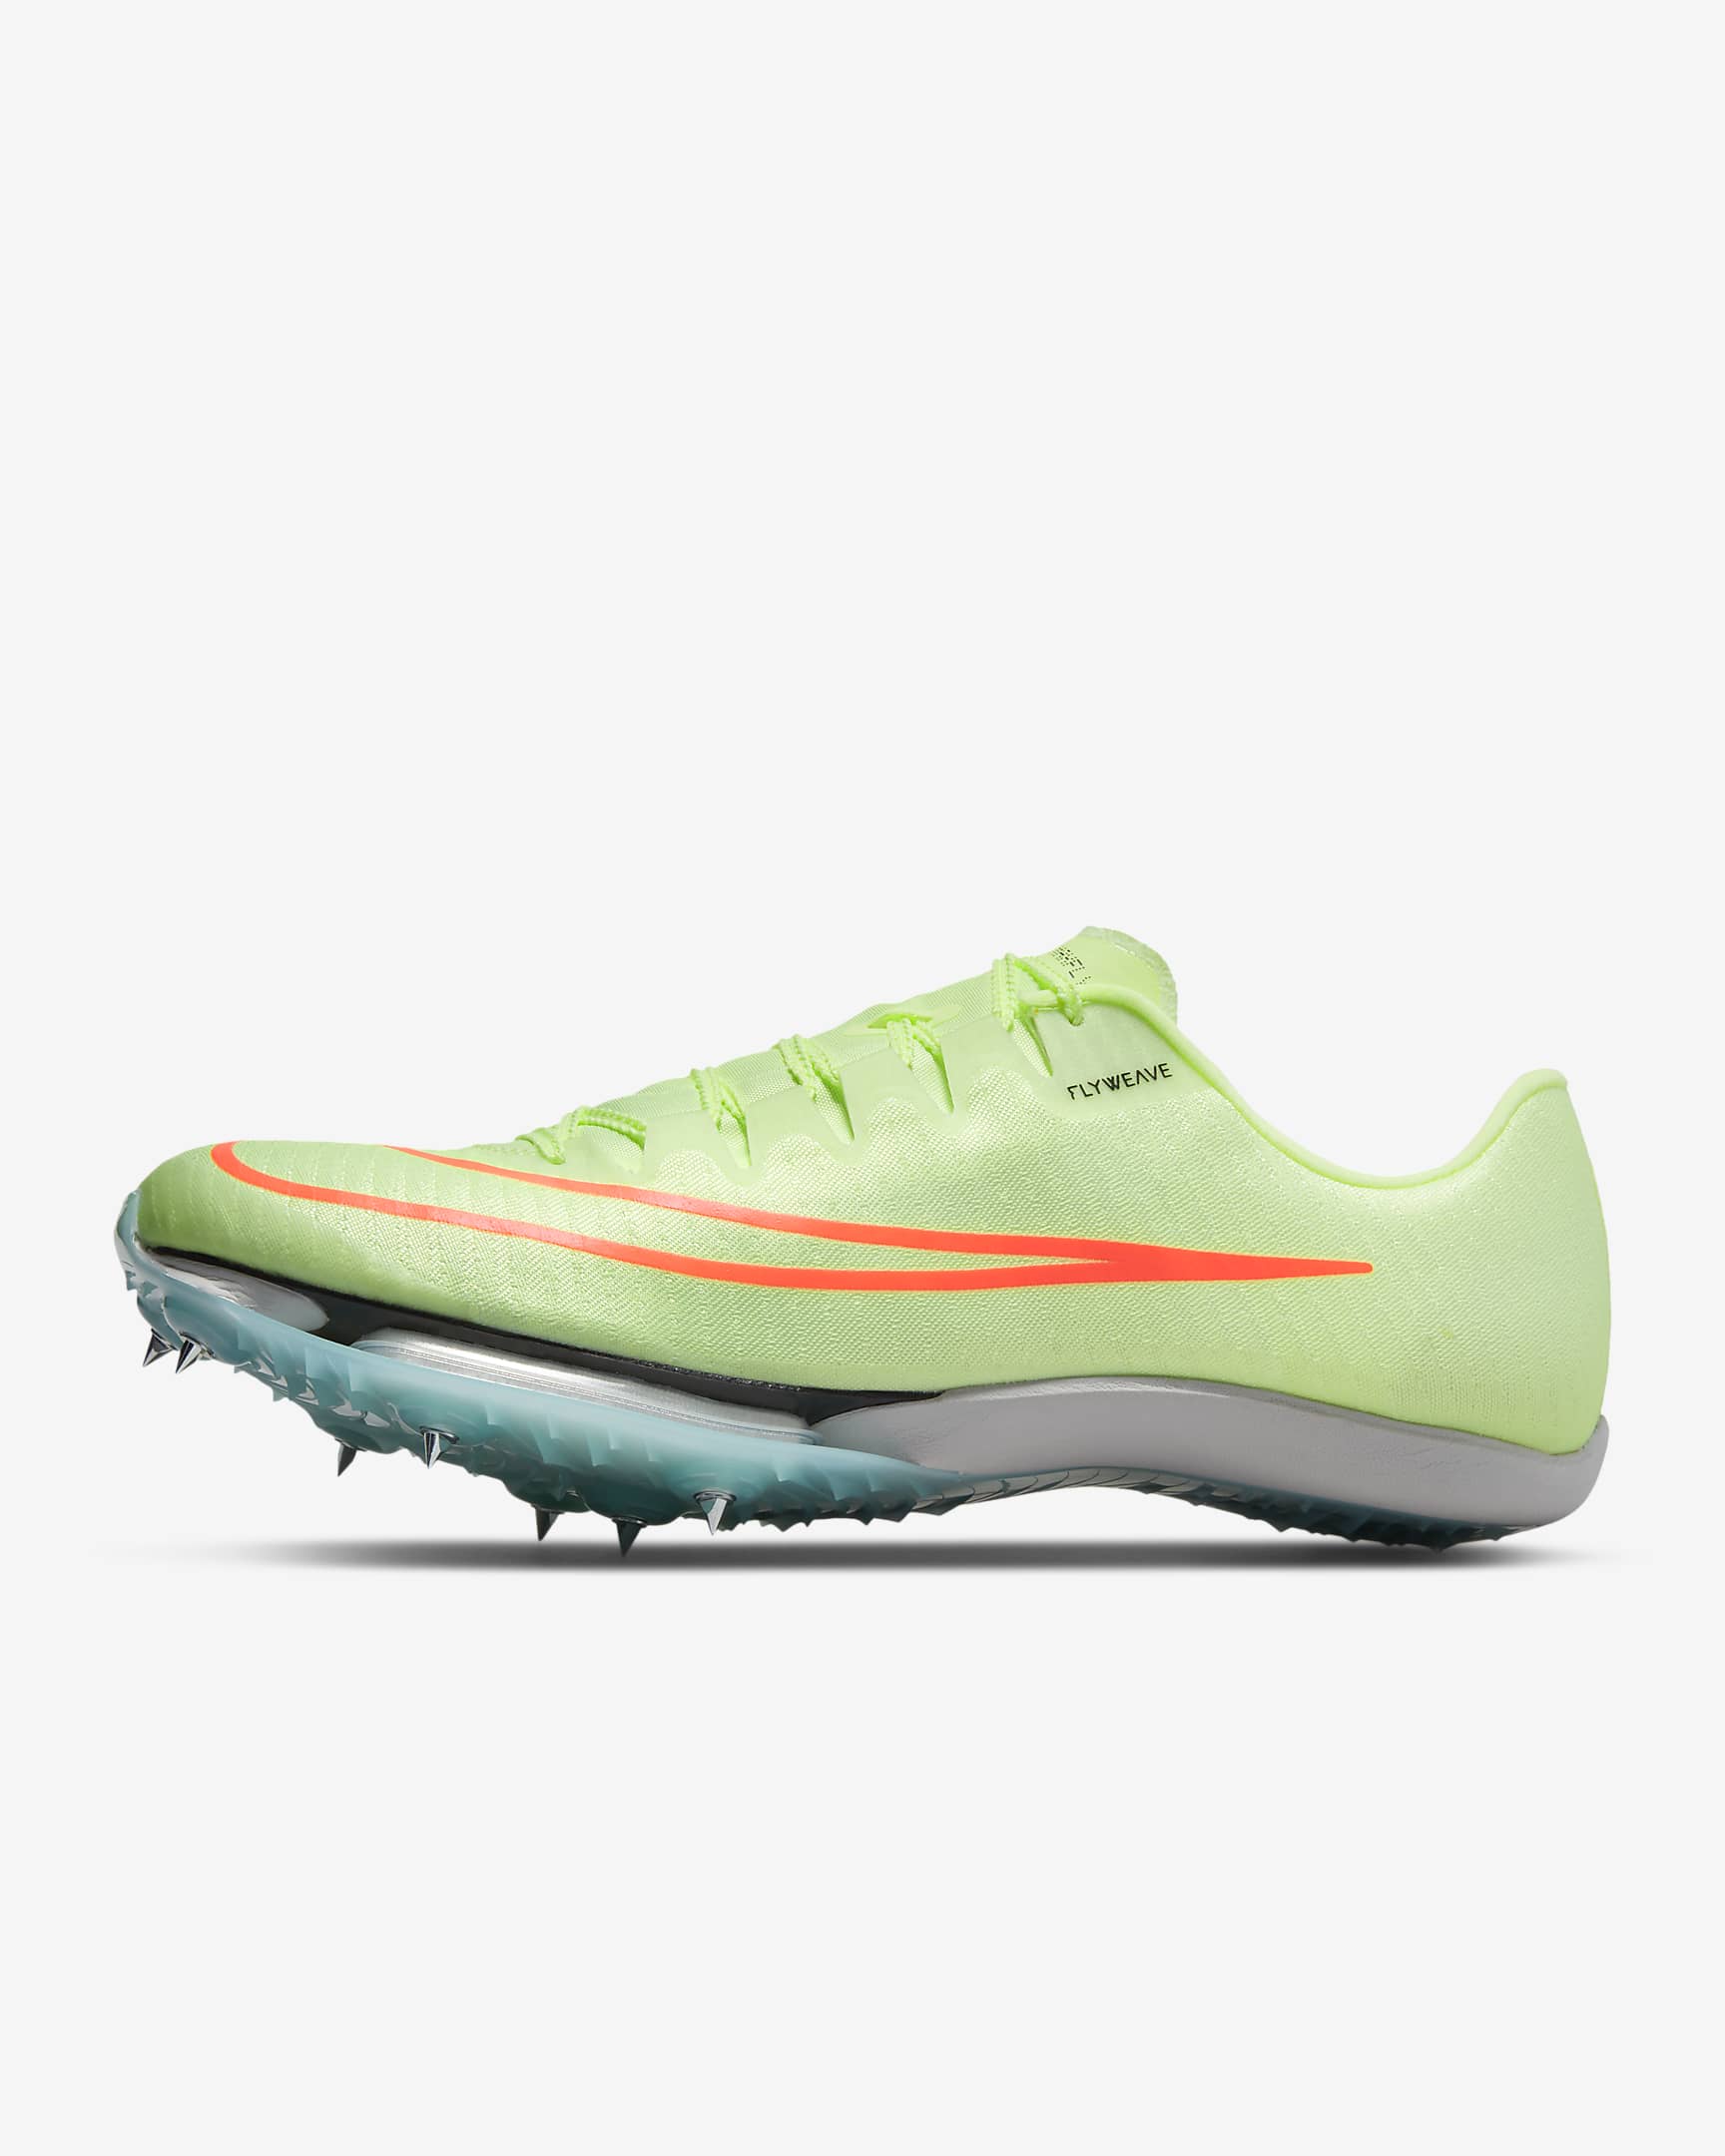 Nike Air Zoom Maxfly Track & Field Sprinting Spikes Barely Volt/Dynamic Turquoise/Photon Dust/Hyper Orange